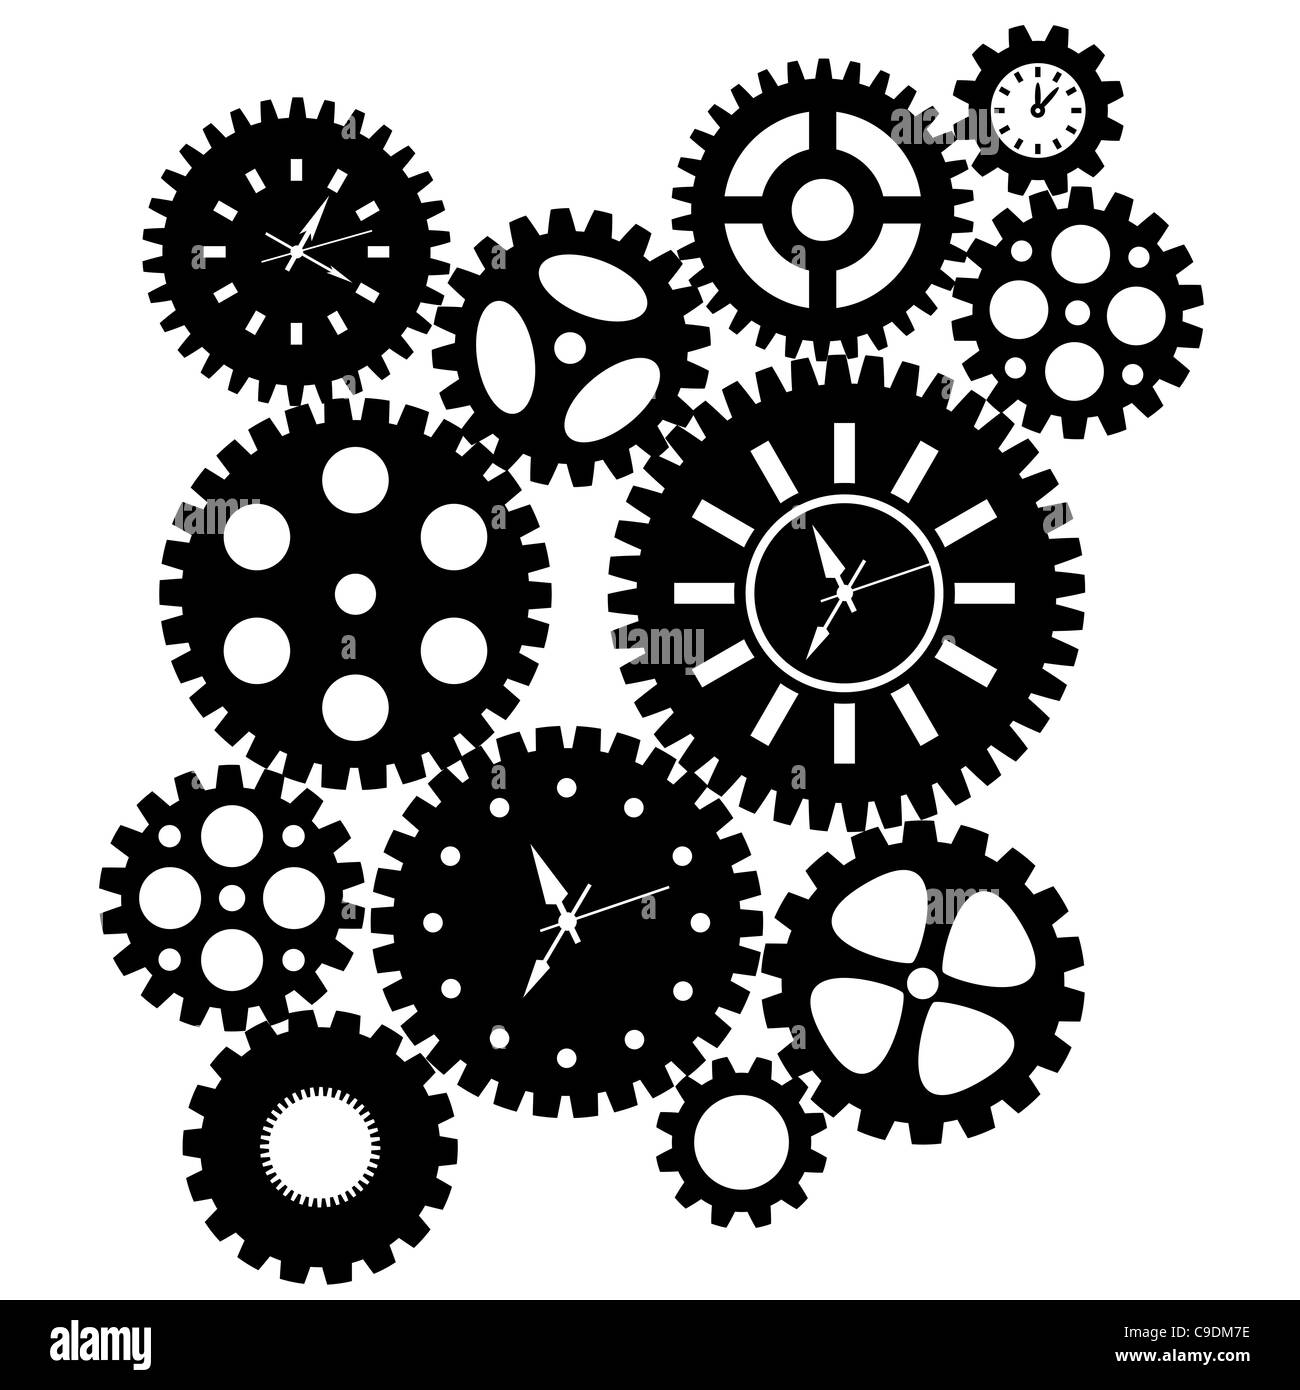 Time Clock Gears Clipart Black SIlhouette Isolated on White Background Illustration Stock Photo